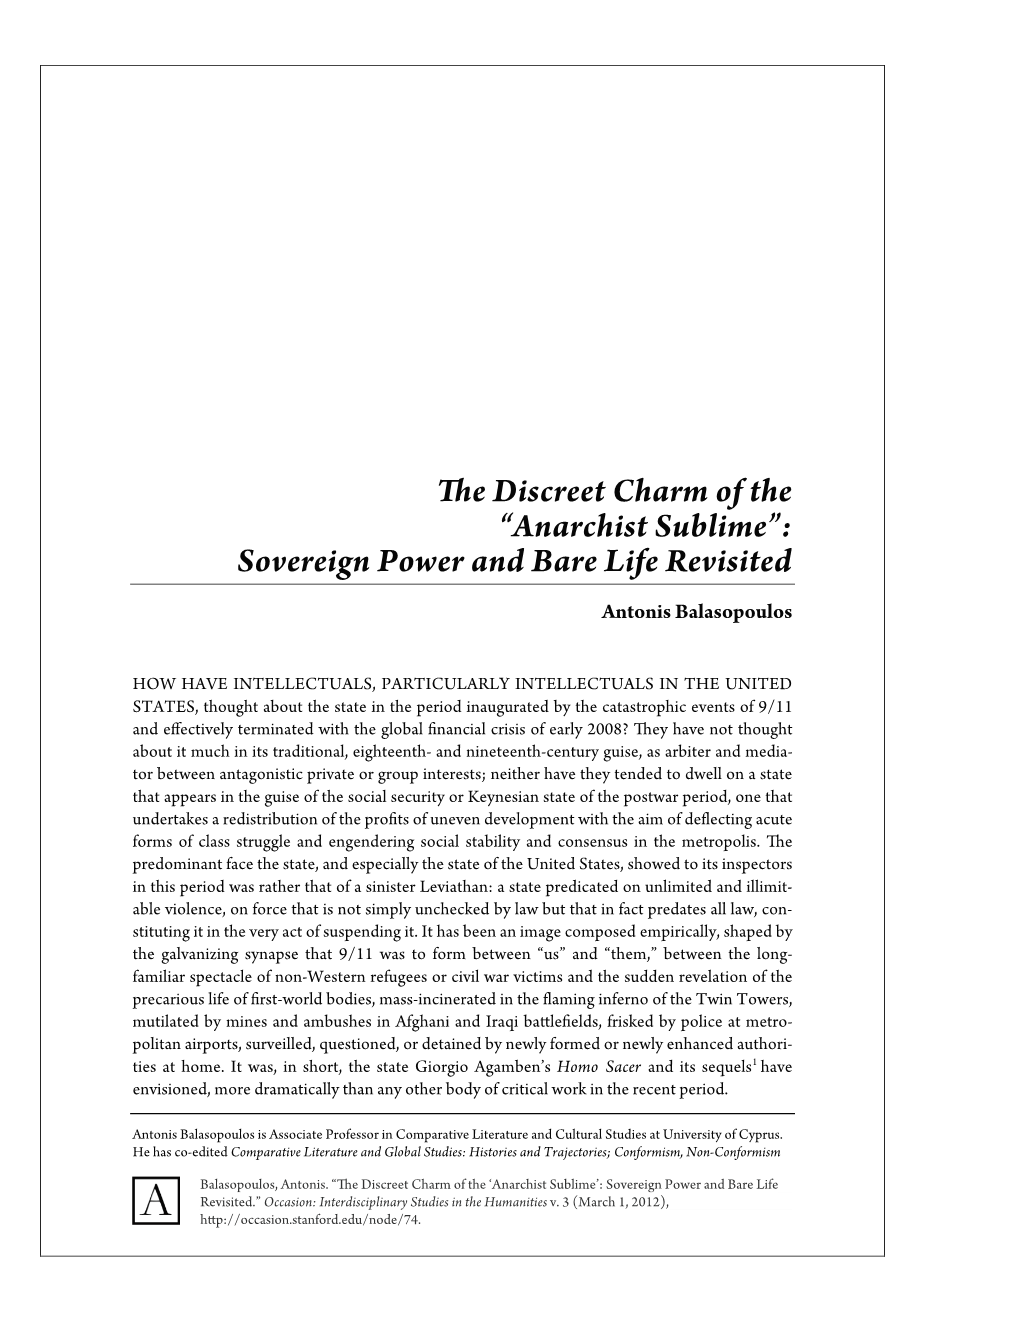 E Discreet Charm of the “Anarchist Sublime”: Sovereign Power and Bare Life Revisited Antonis Balasopoulos